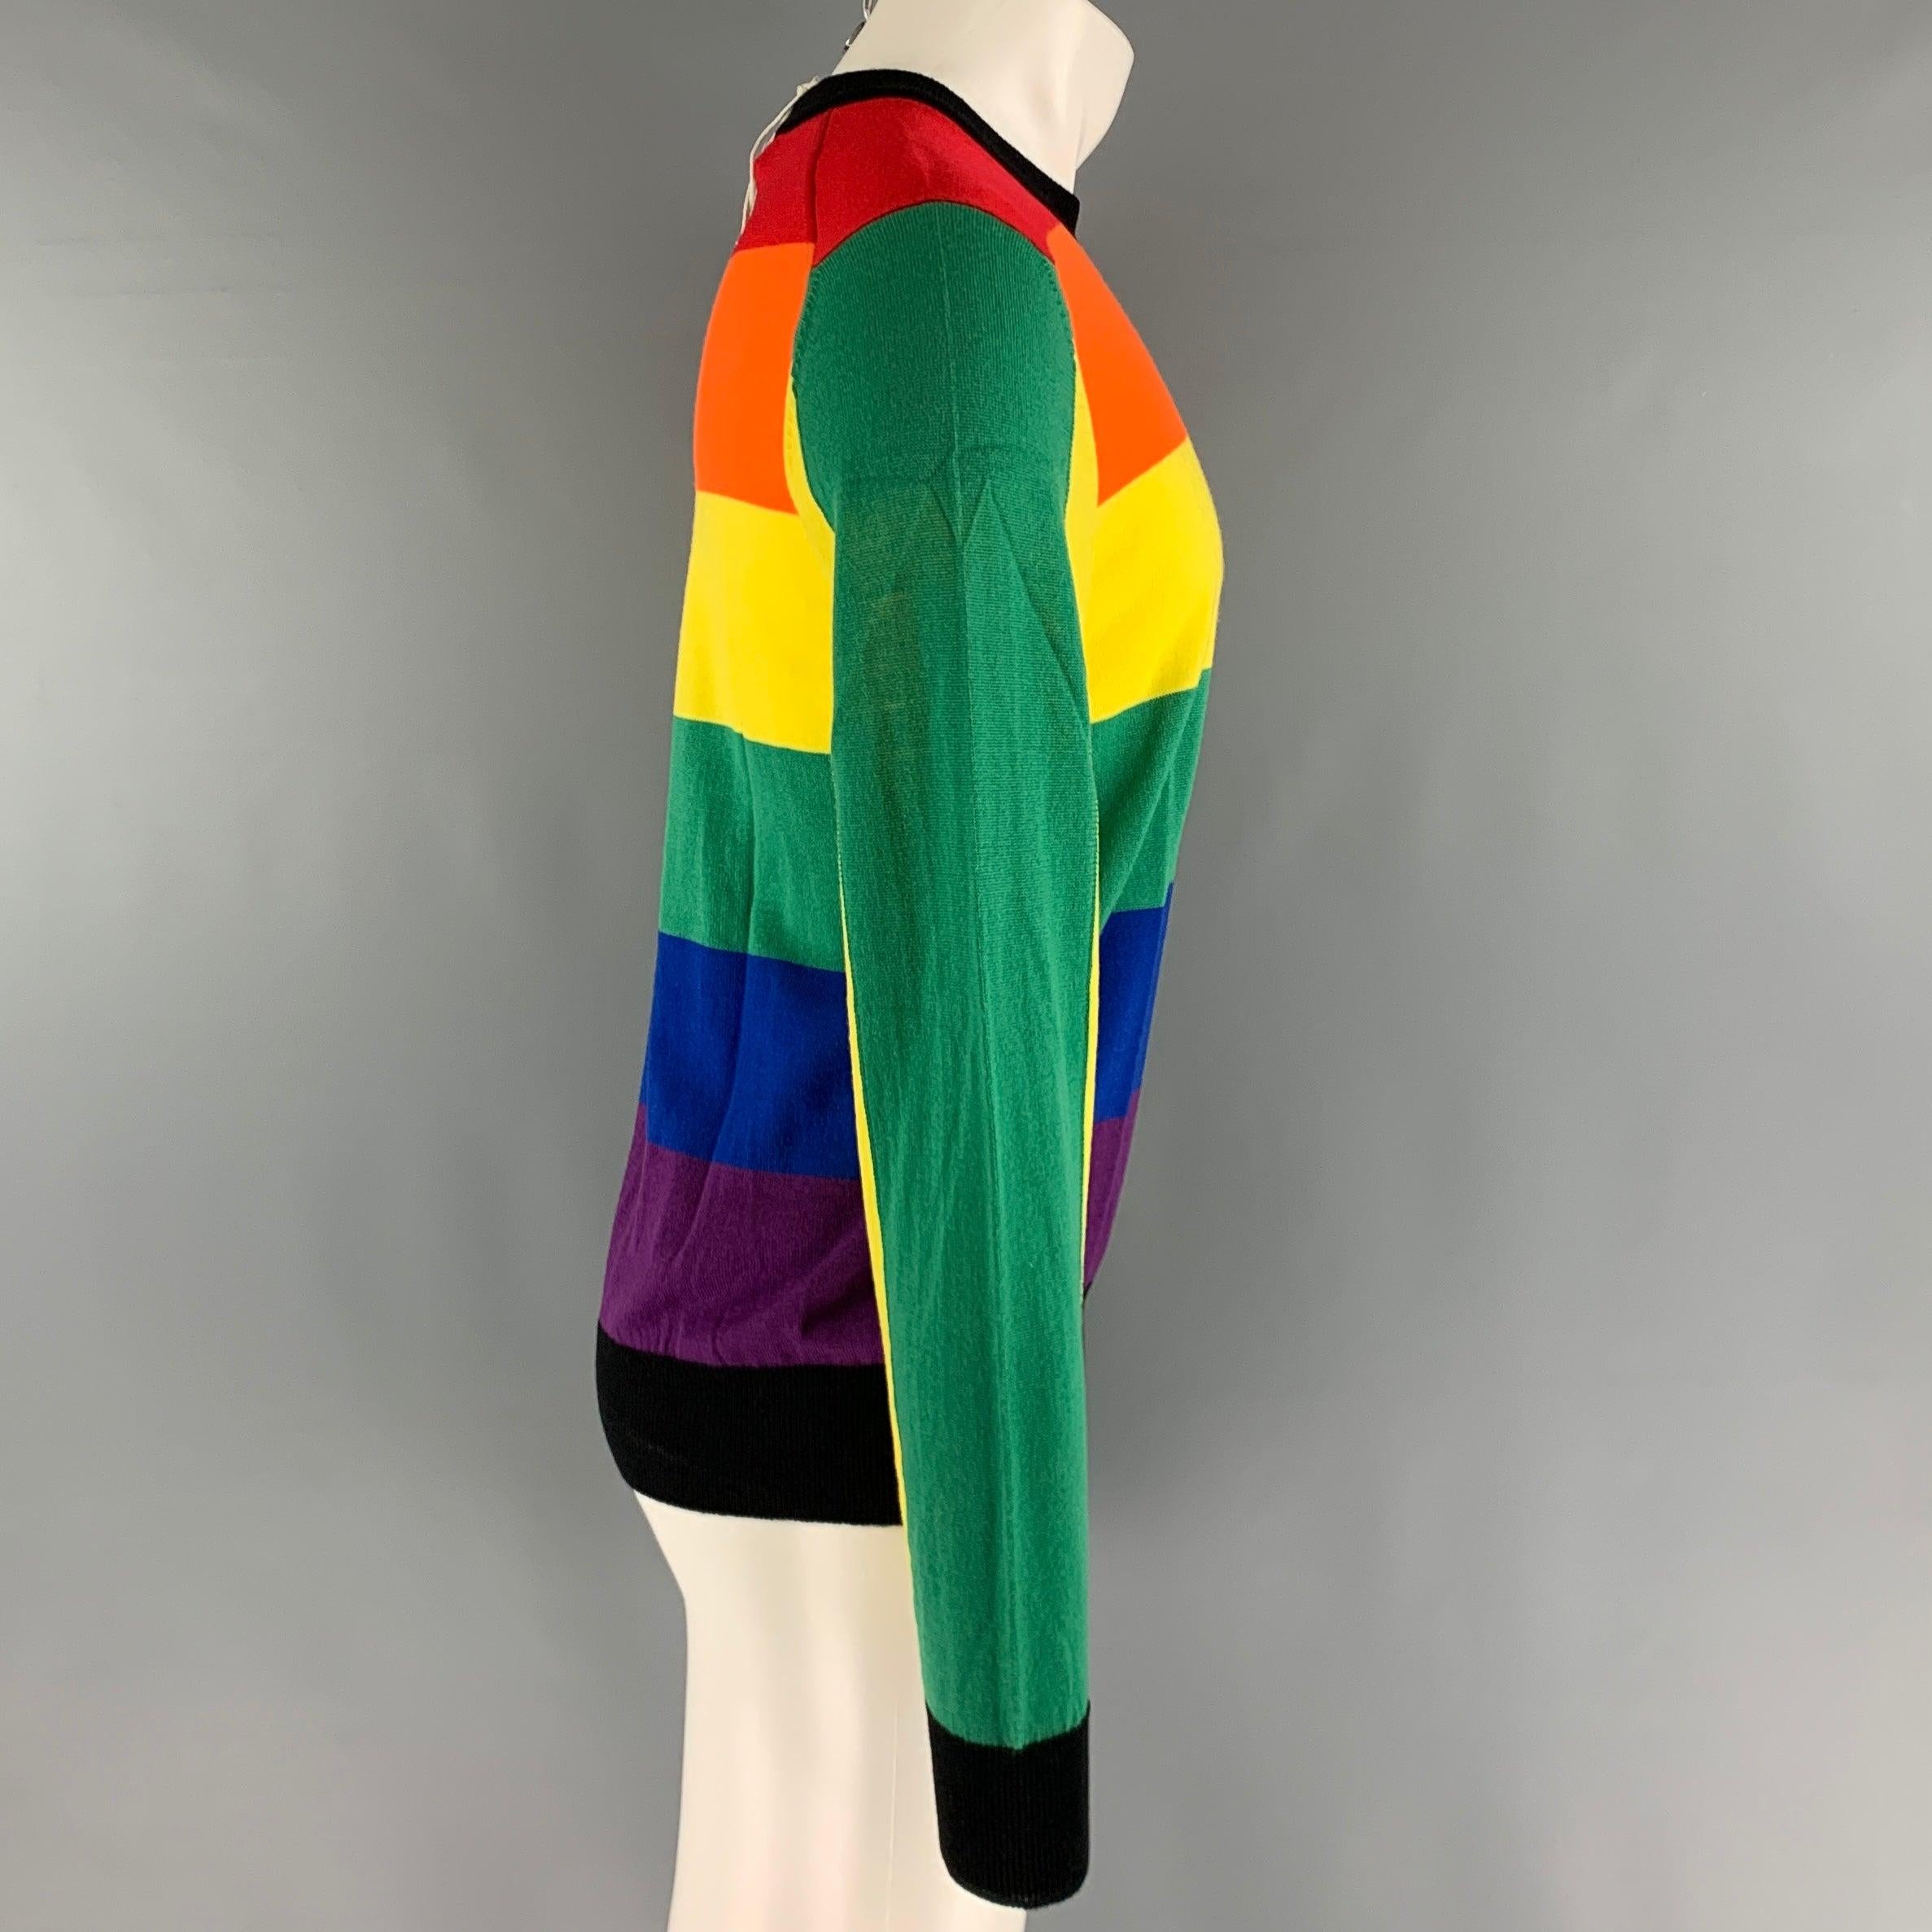 Comme des Garçons Shirt x Vetements 2017 Rainbow striped wool sweater from a fine weave of 100% wool in a striking Gay Rainbow Flag panelled stripe. Made in Italy A rarely seen sweater from an elusive collaboration!New with tags 

Marked:   M